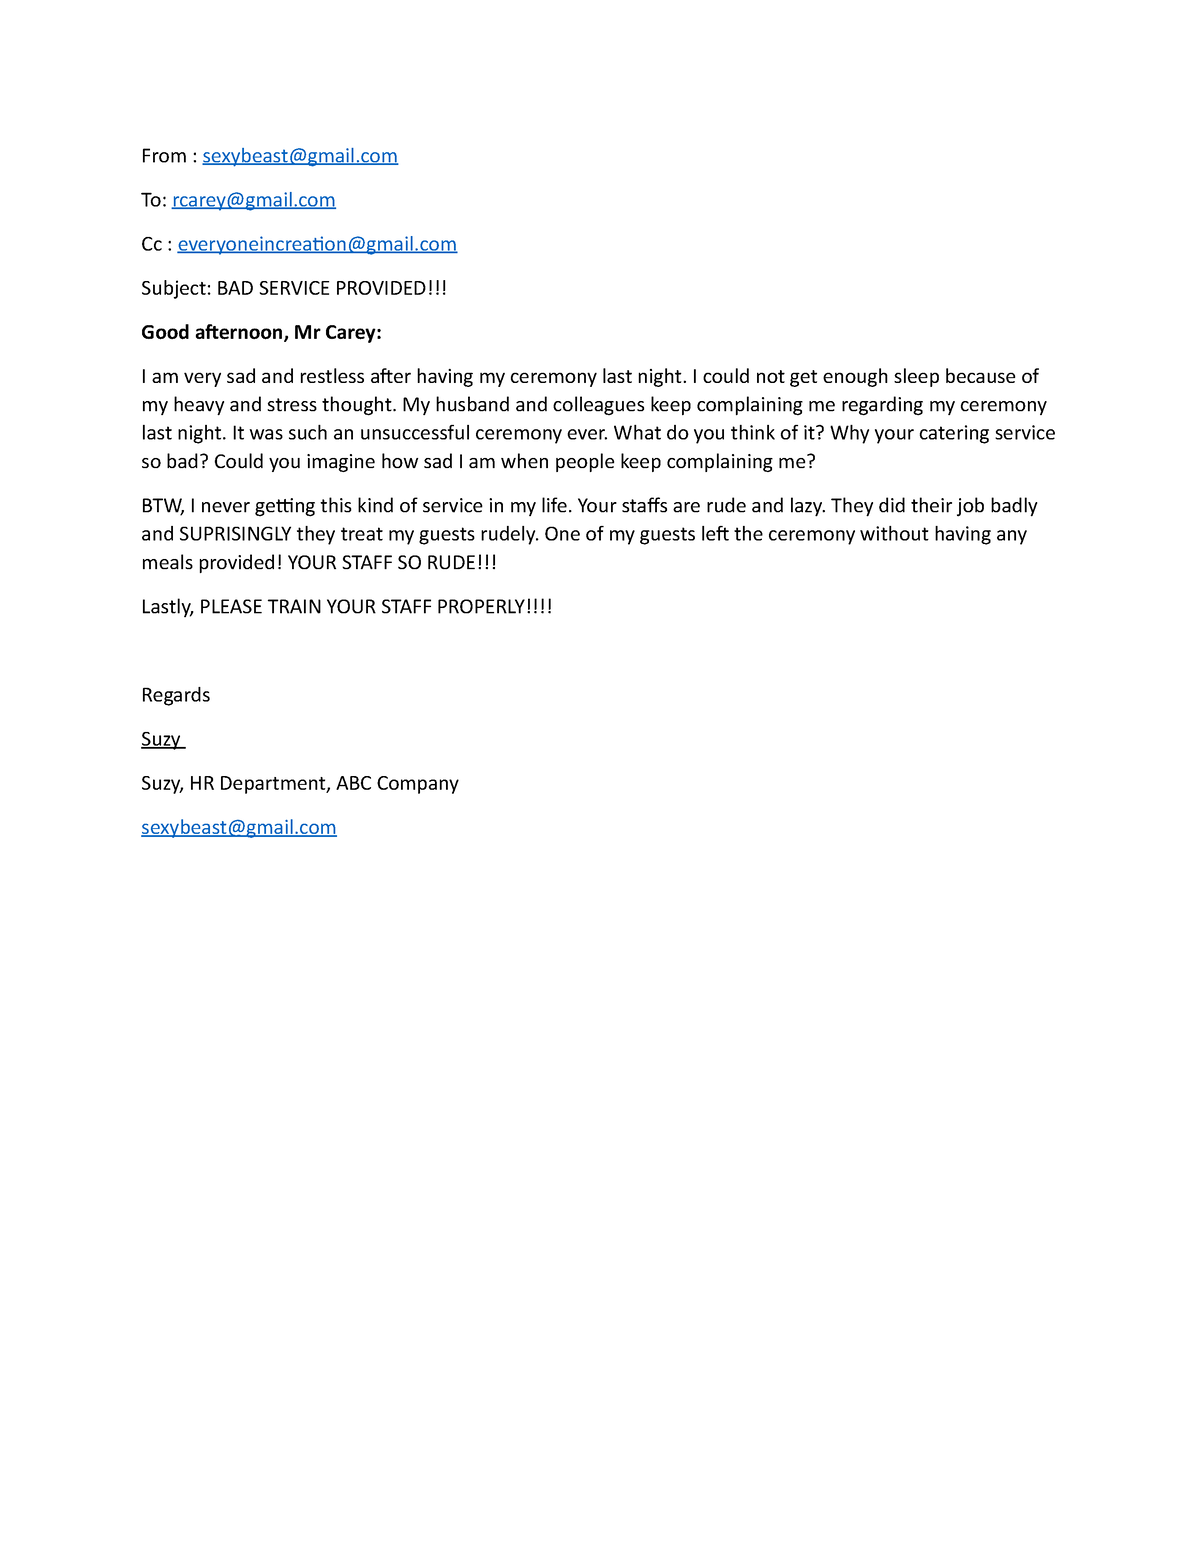 Example bad email for complaint - From : sexybeast@gmail To: rcarey ...